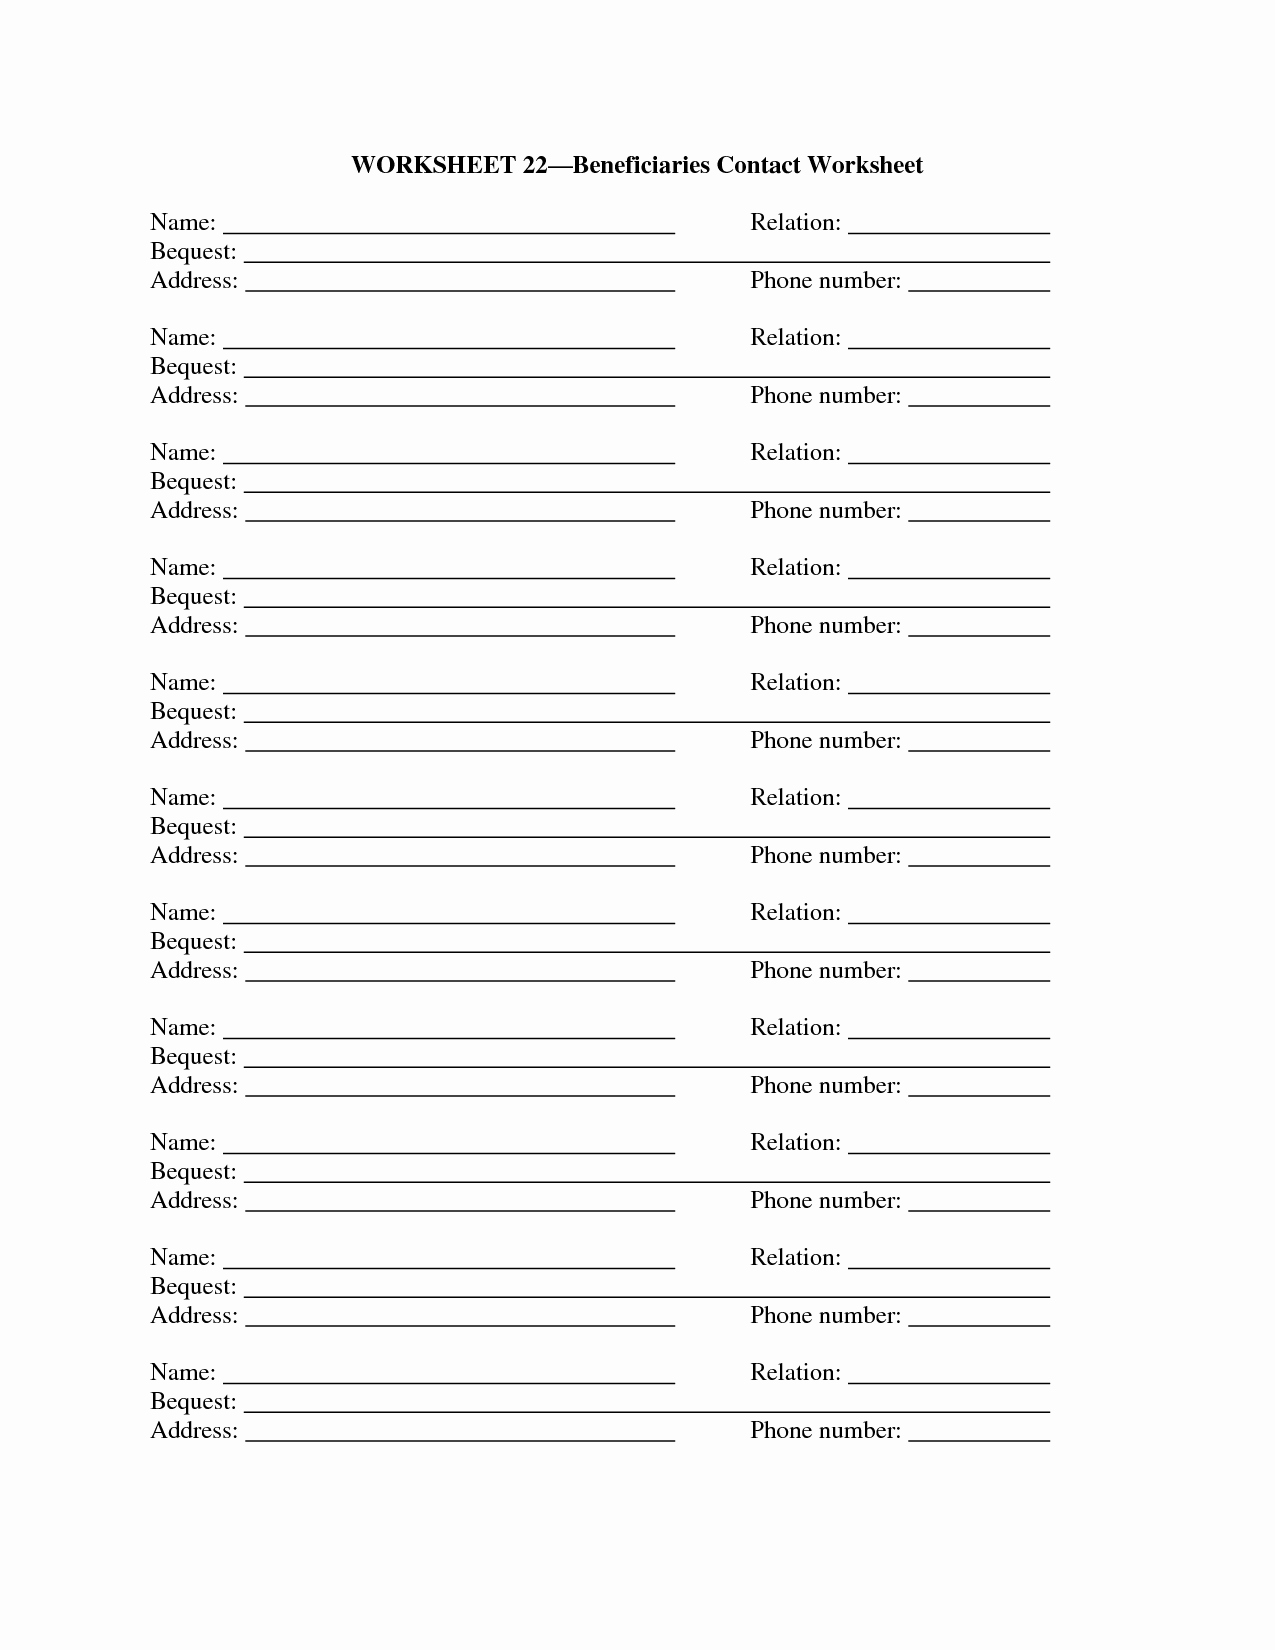 Name and Phone Number Template Best Of 14 Best Of Telephone Number Worksheet Learning